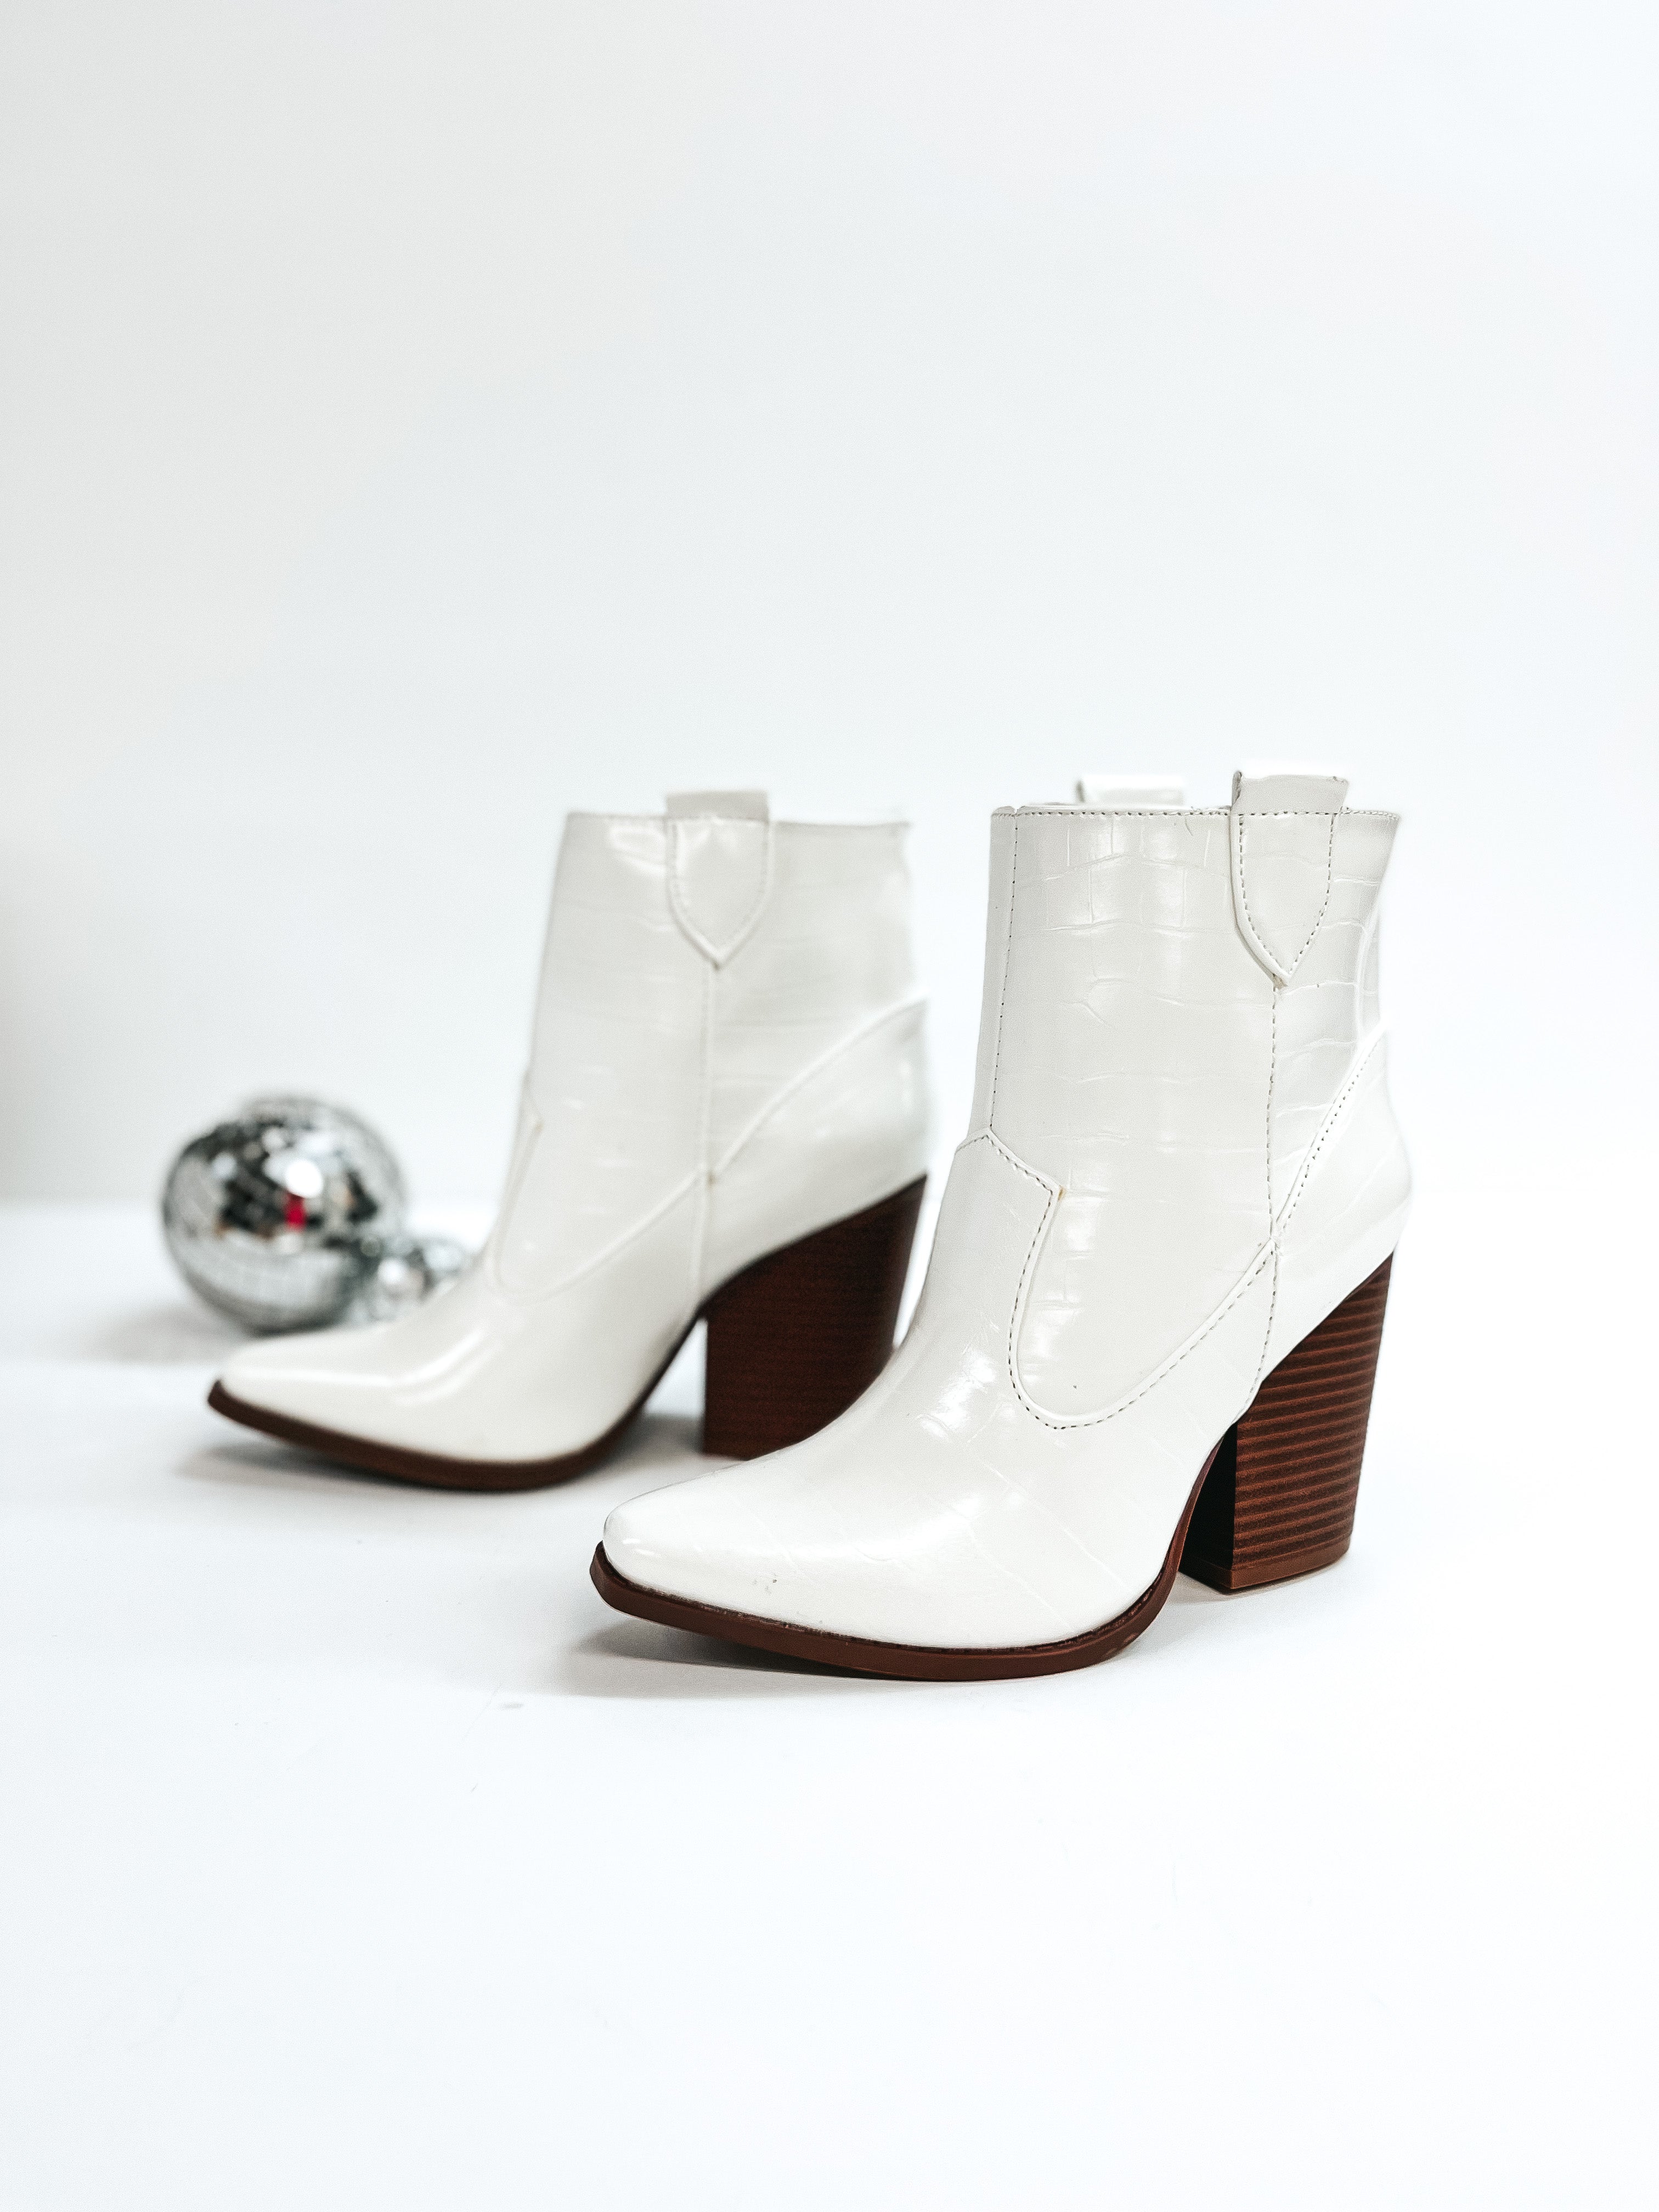 Broadway Strut Crocodile Print Heeled Ankle Booties in White - Giddy Up Glamour Boutique